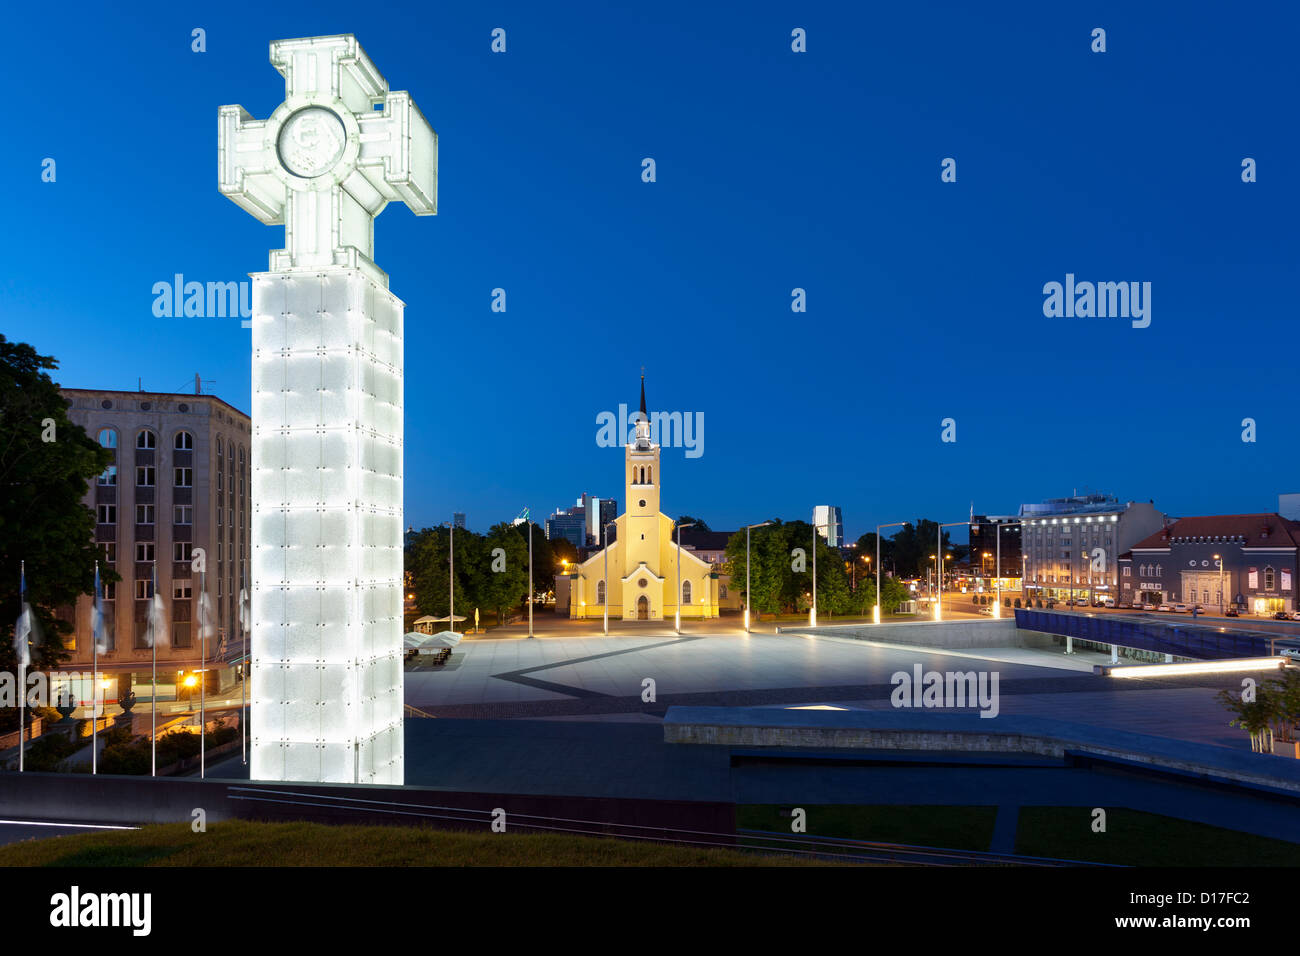 Church monument overlooking town square Stock Photo